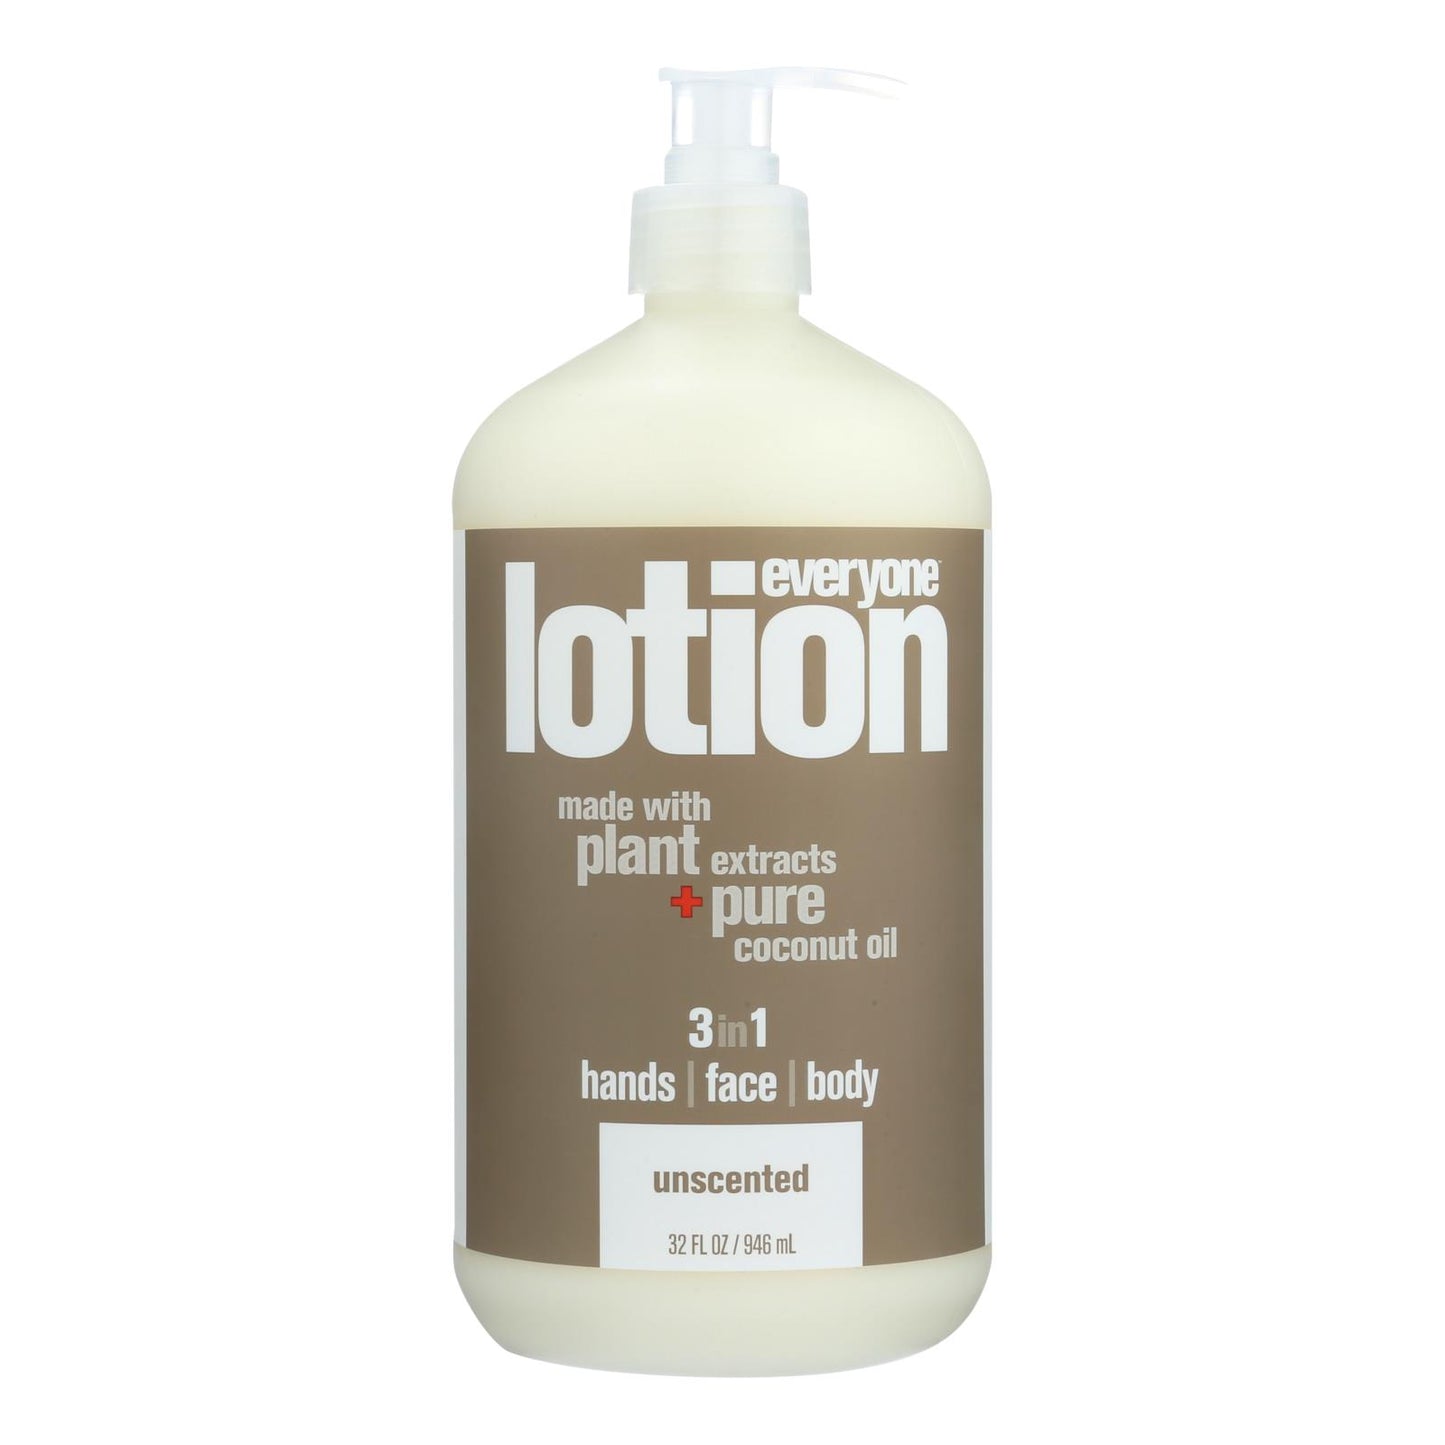 Everyone - Lotion - Unscented - 32 Fl Oz